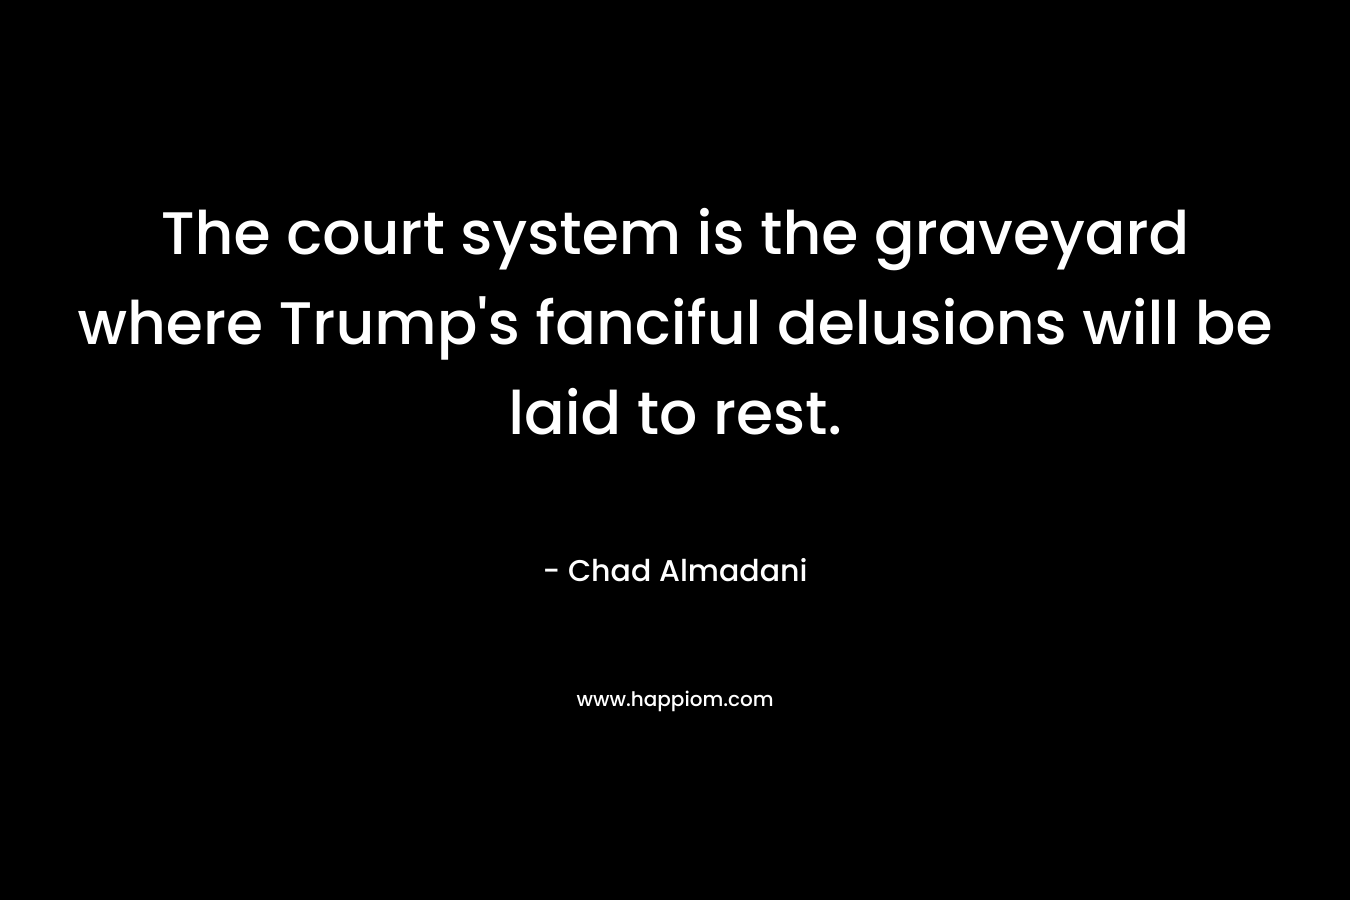 The court system is the graveyard where Trump’s fanciful delusions will be laid to rest. – Chad Almadani